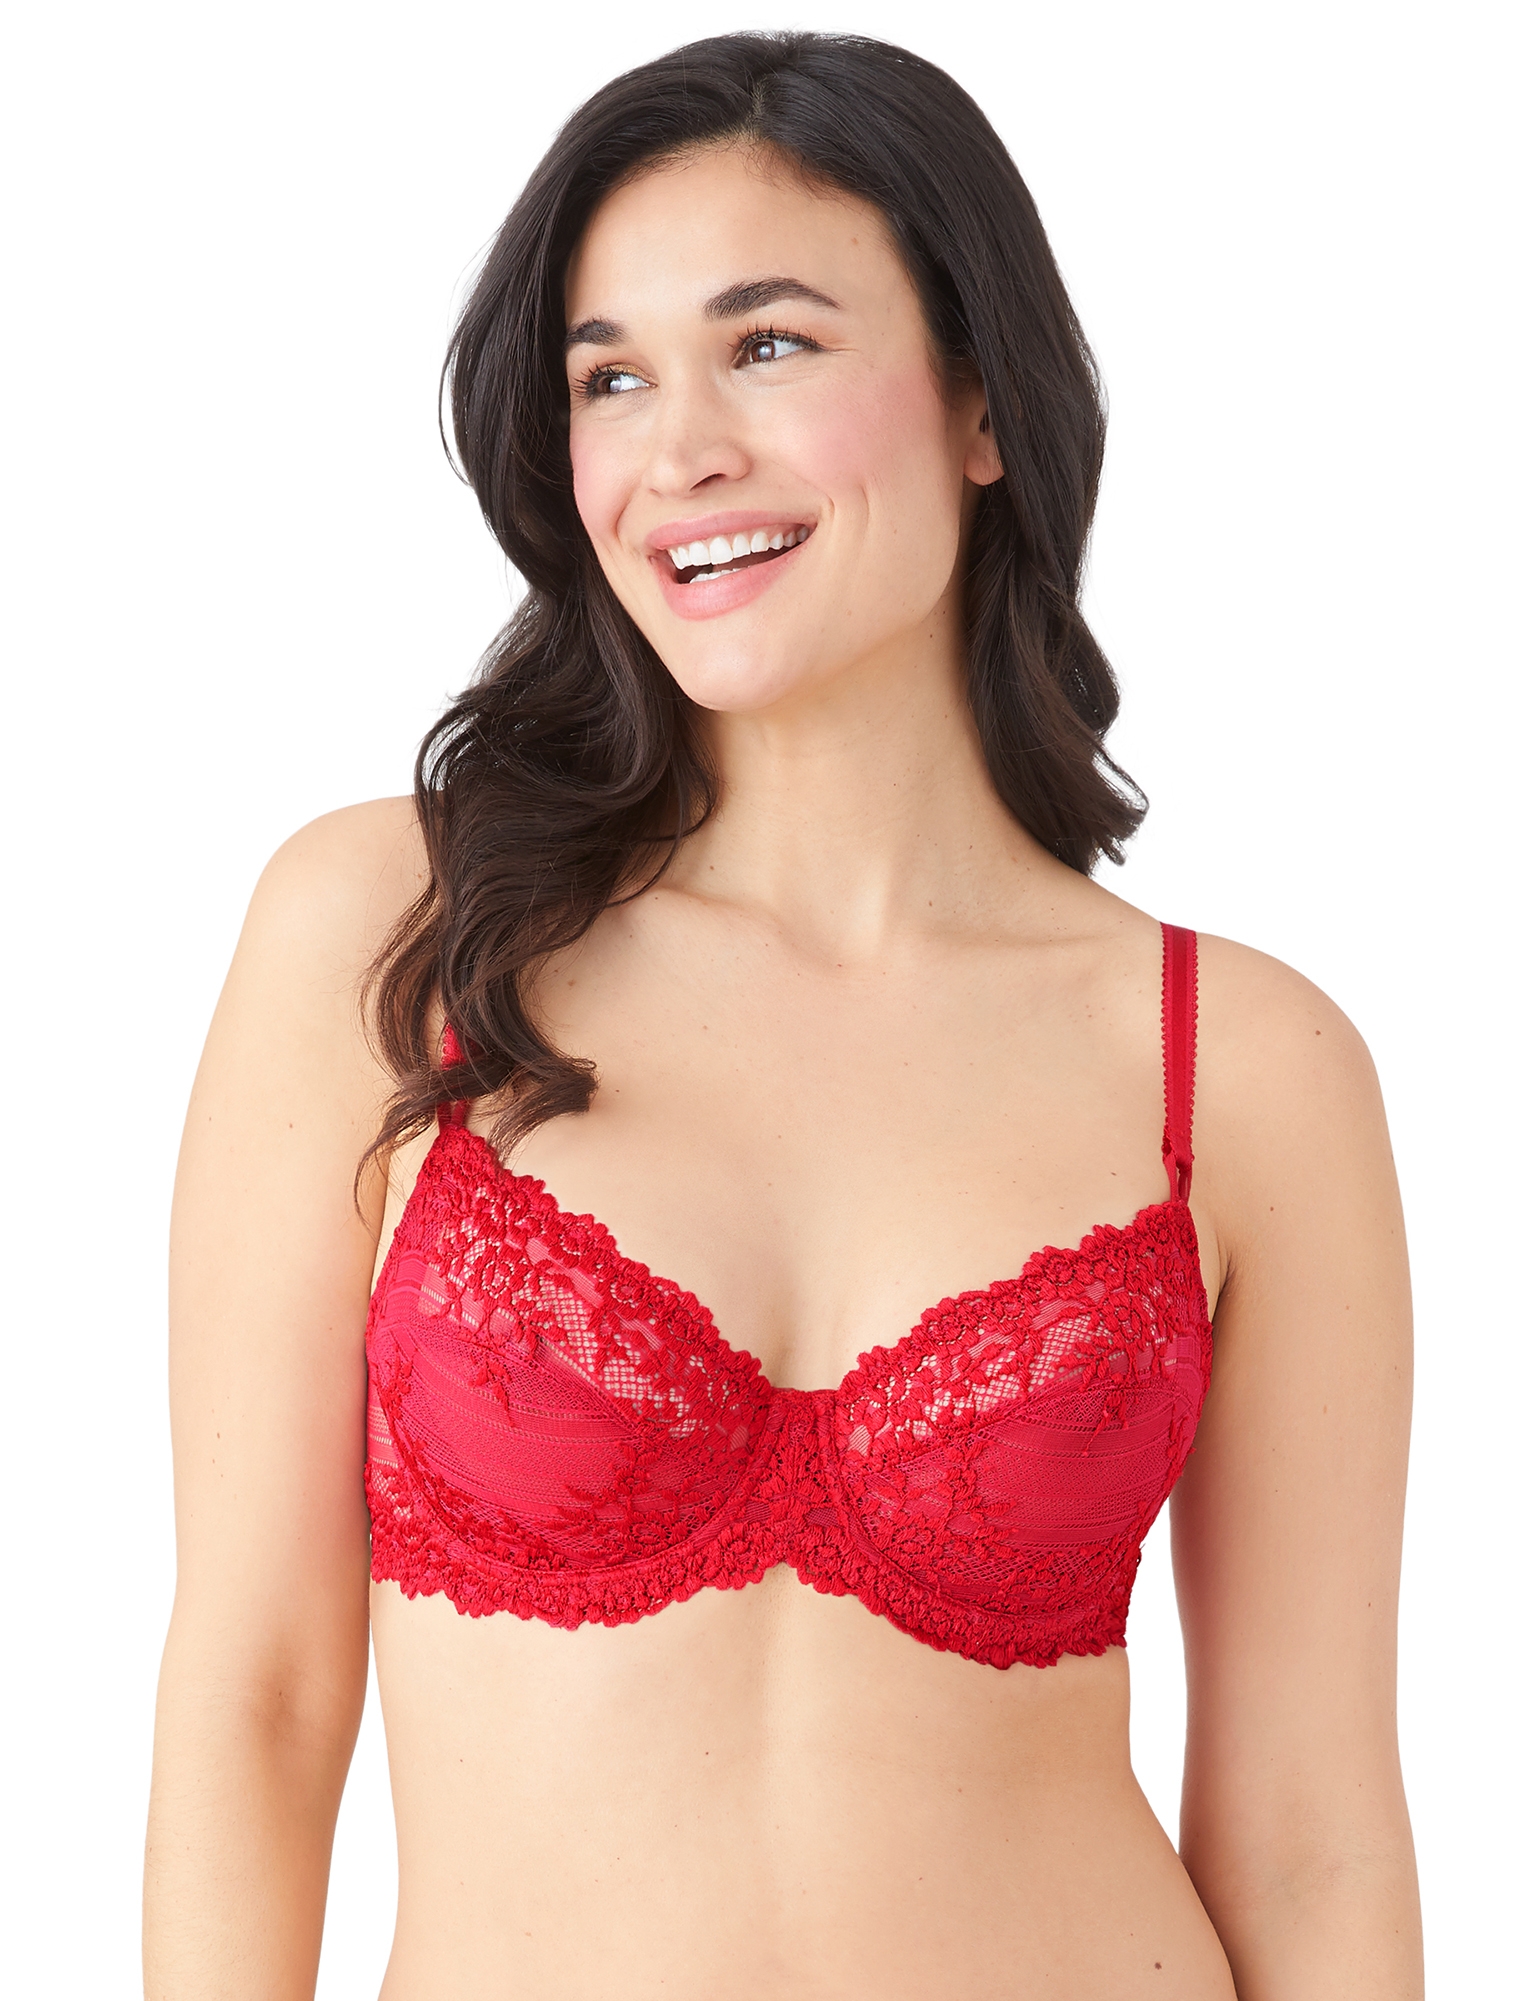 Buy Wacoal Retro Chic Non-padded Wi Full Coverage Support Everyday Comfort  Bra - Persian Red online